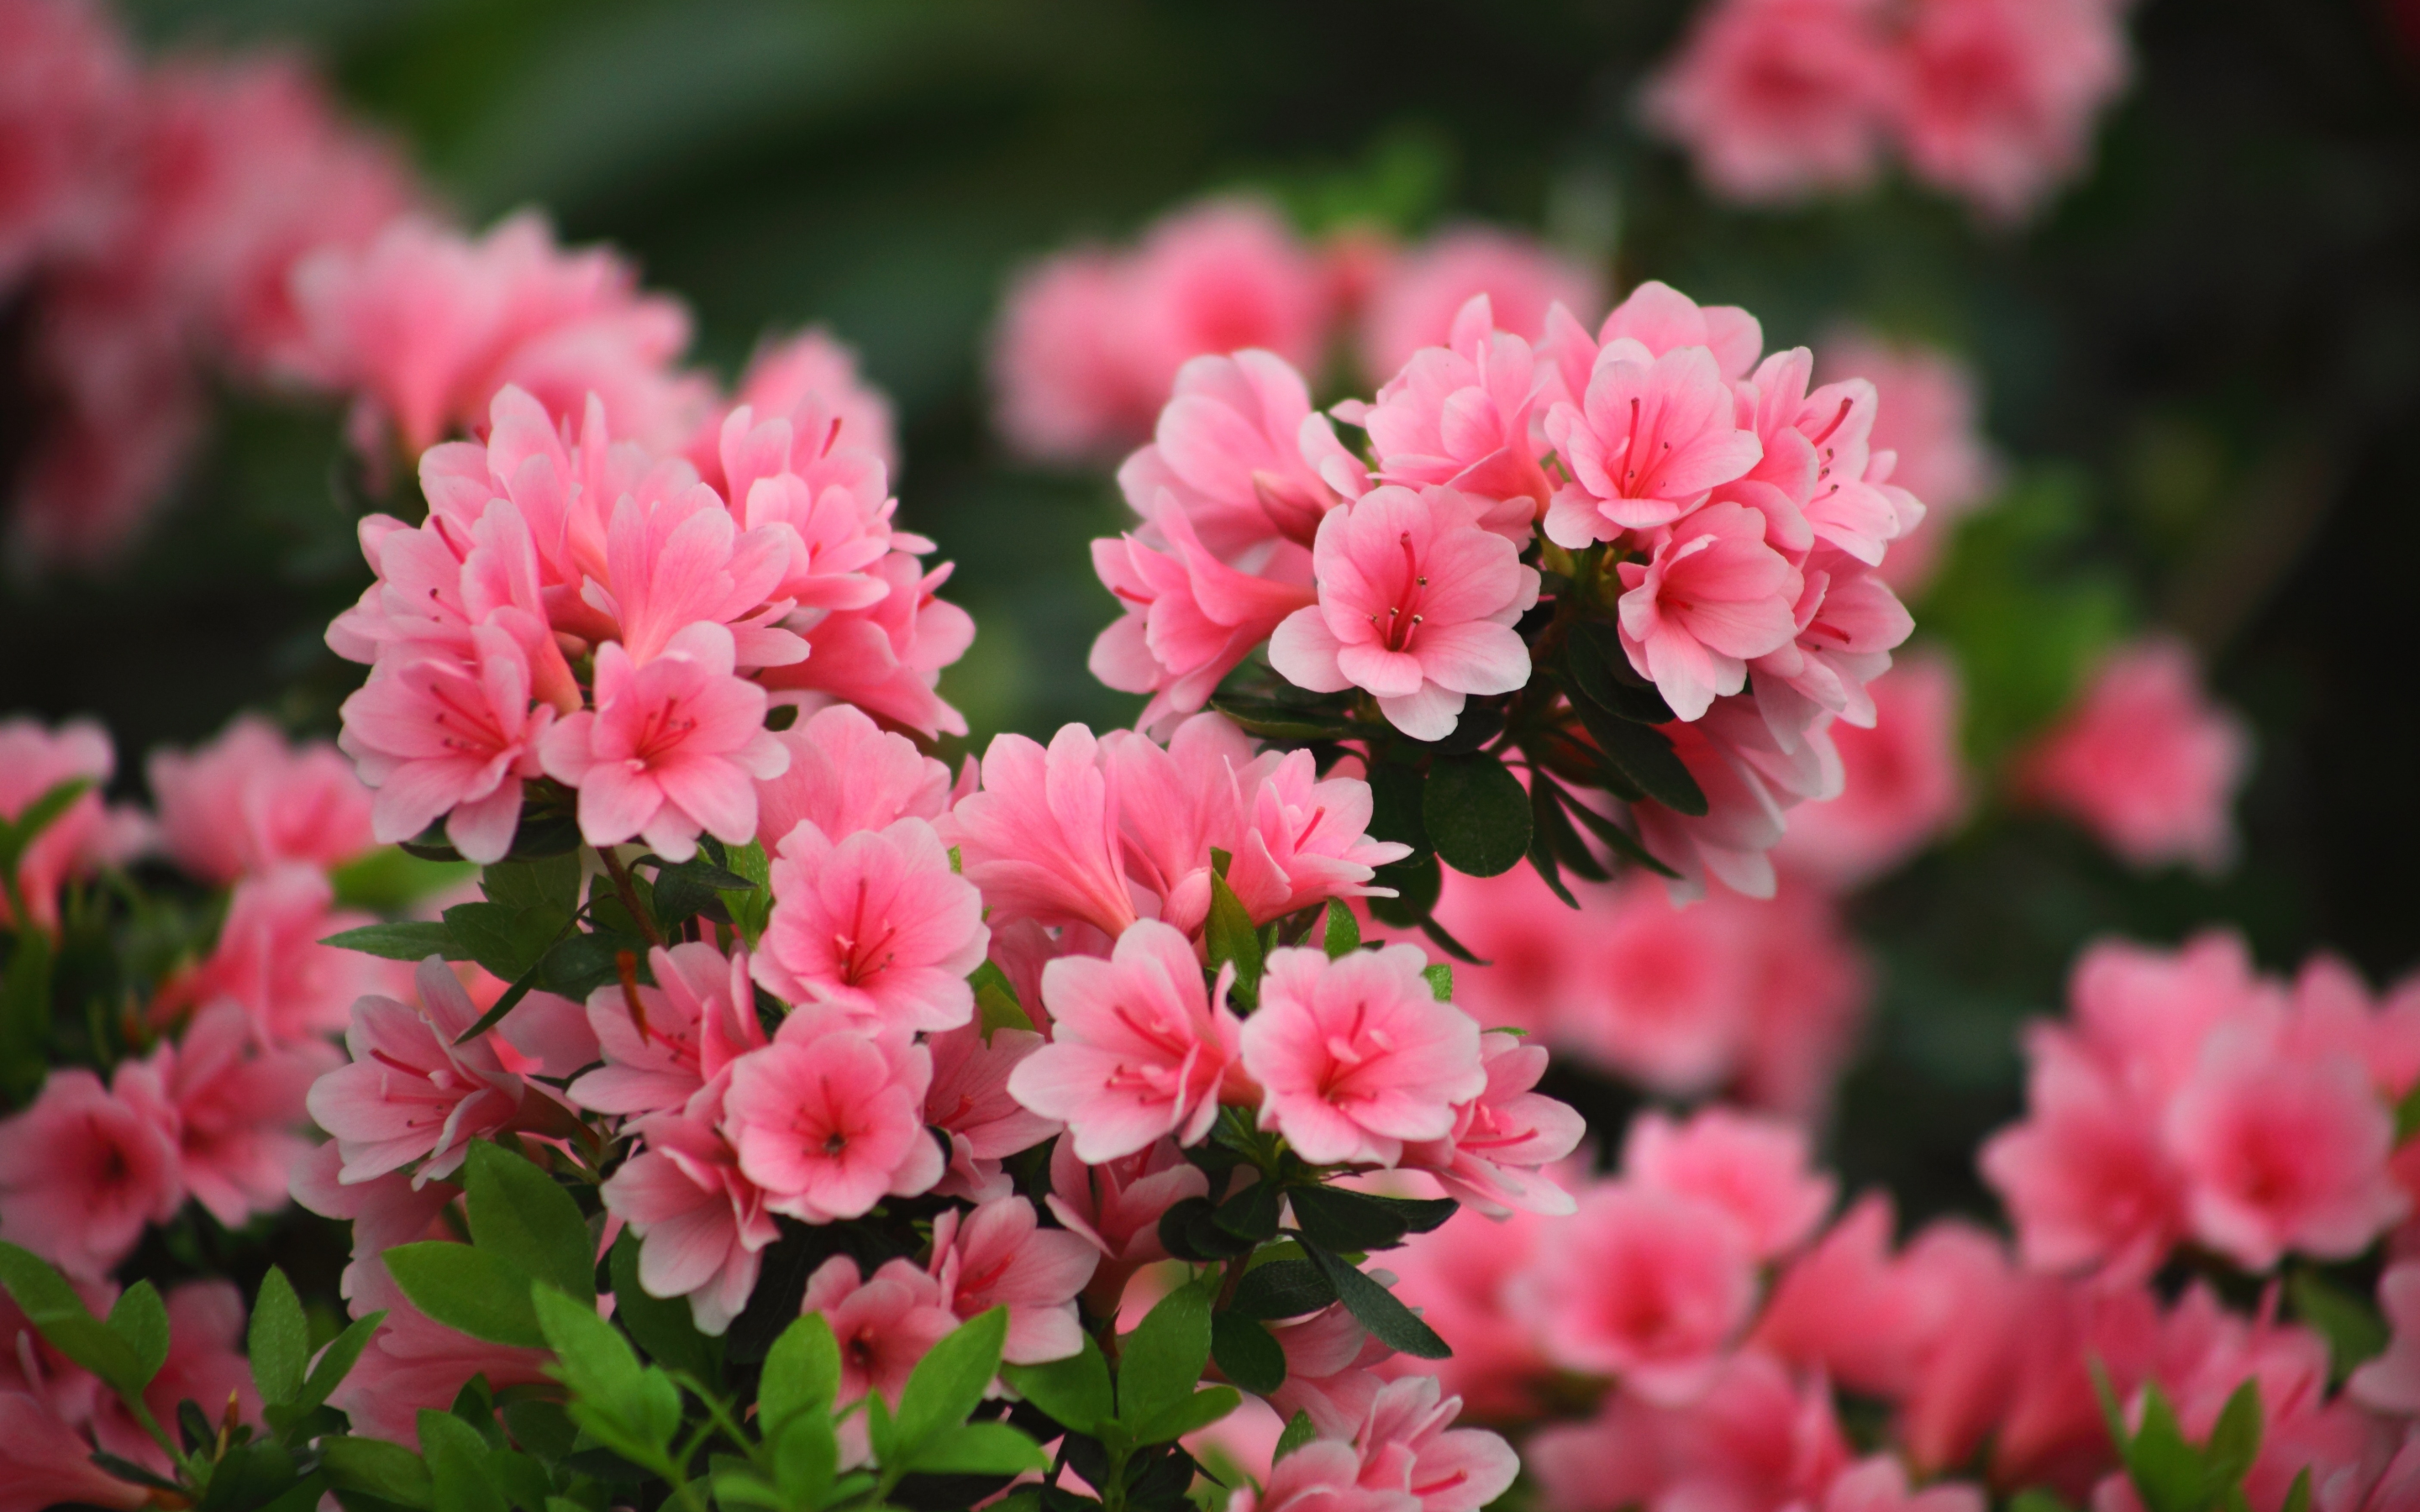 Blossom, spring, pink flowers, nature, 2880x1800 wallpaper